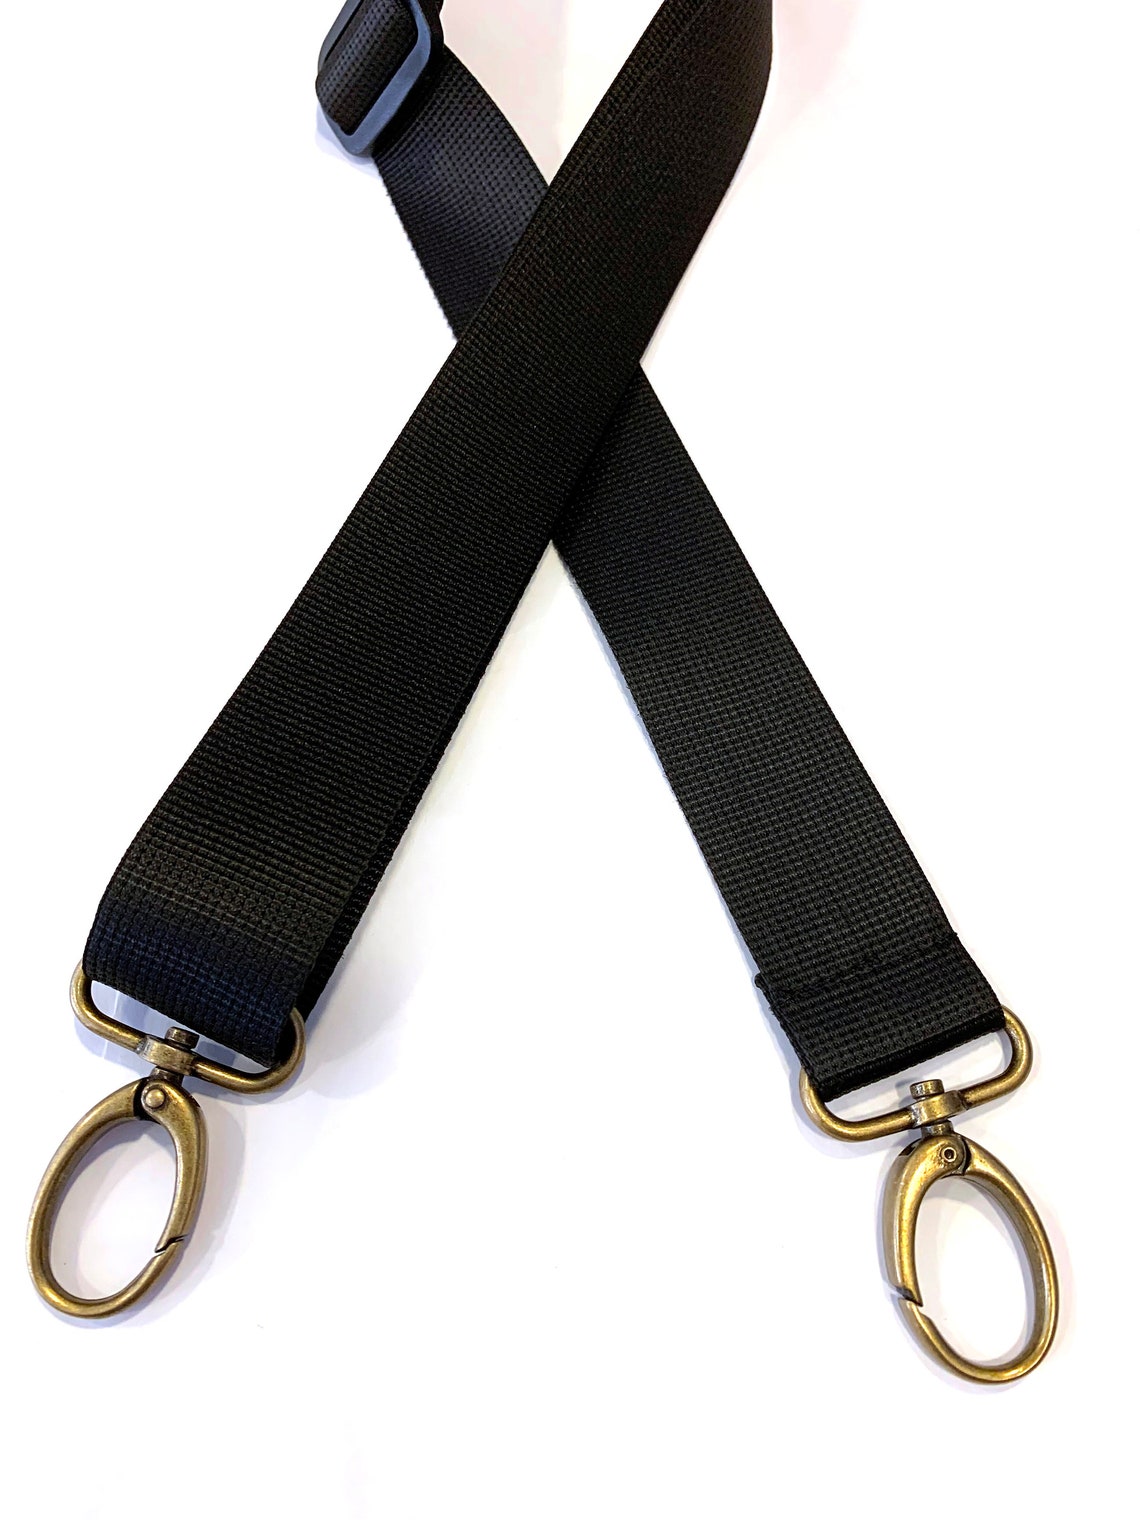 Black Adjustable Strap for Bags. Belt for Bags. Accessory for - Etsy ...